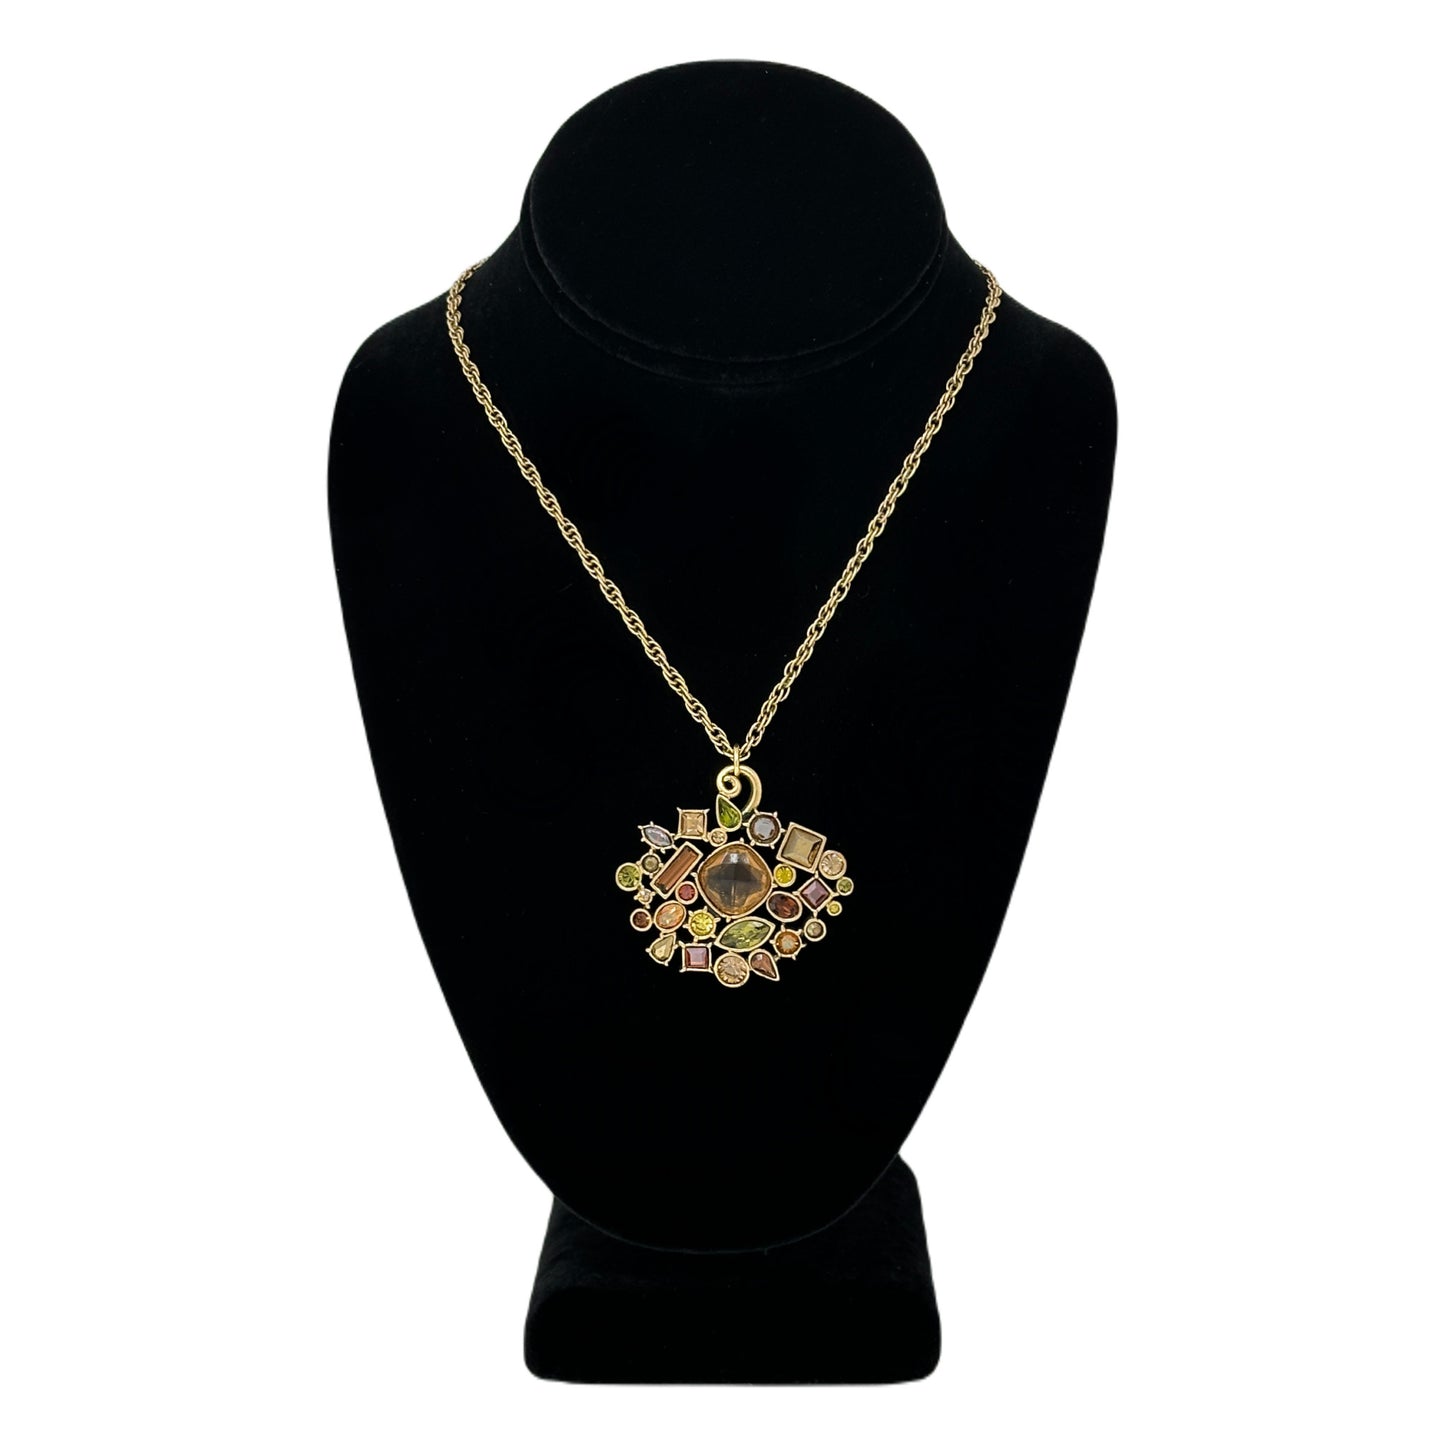 Patricia Locke Revelry Necklace in Gold Orchard